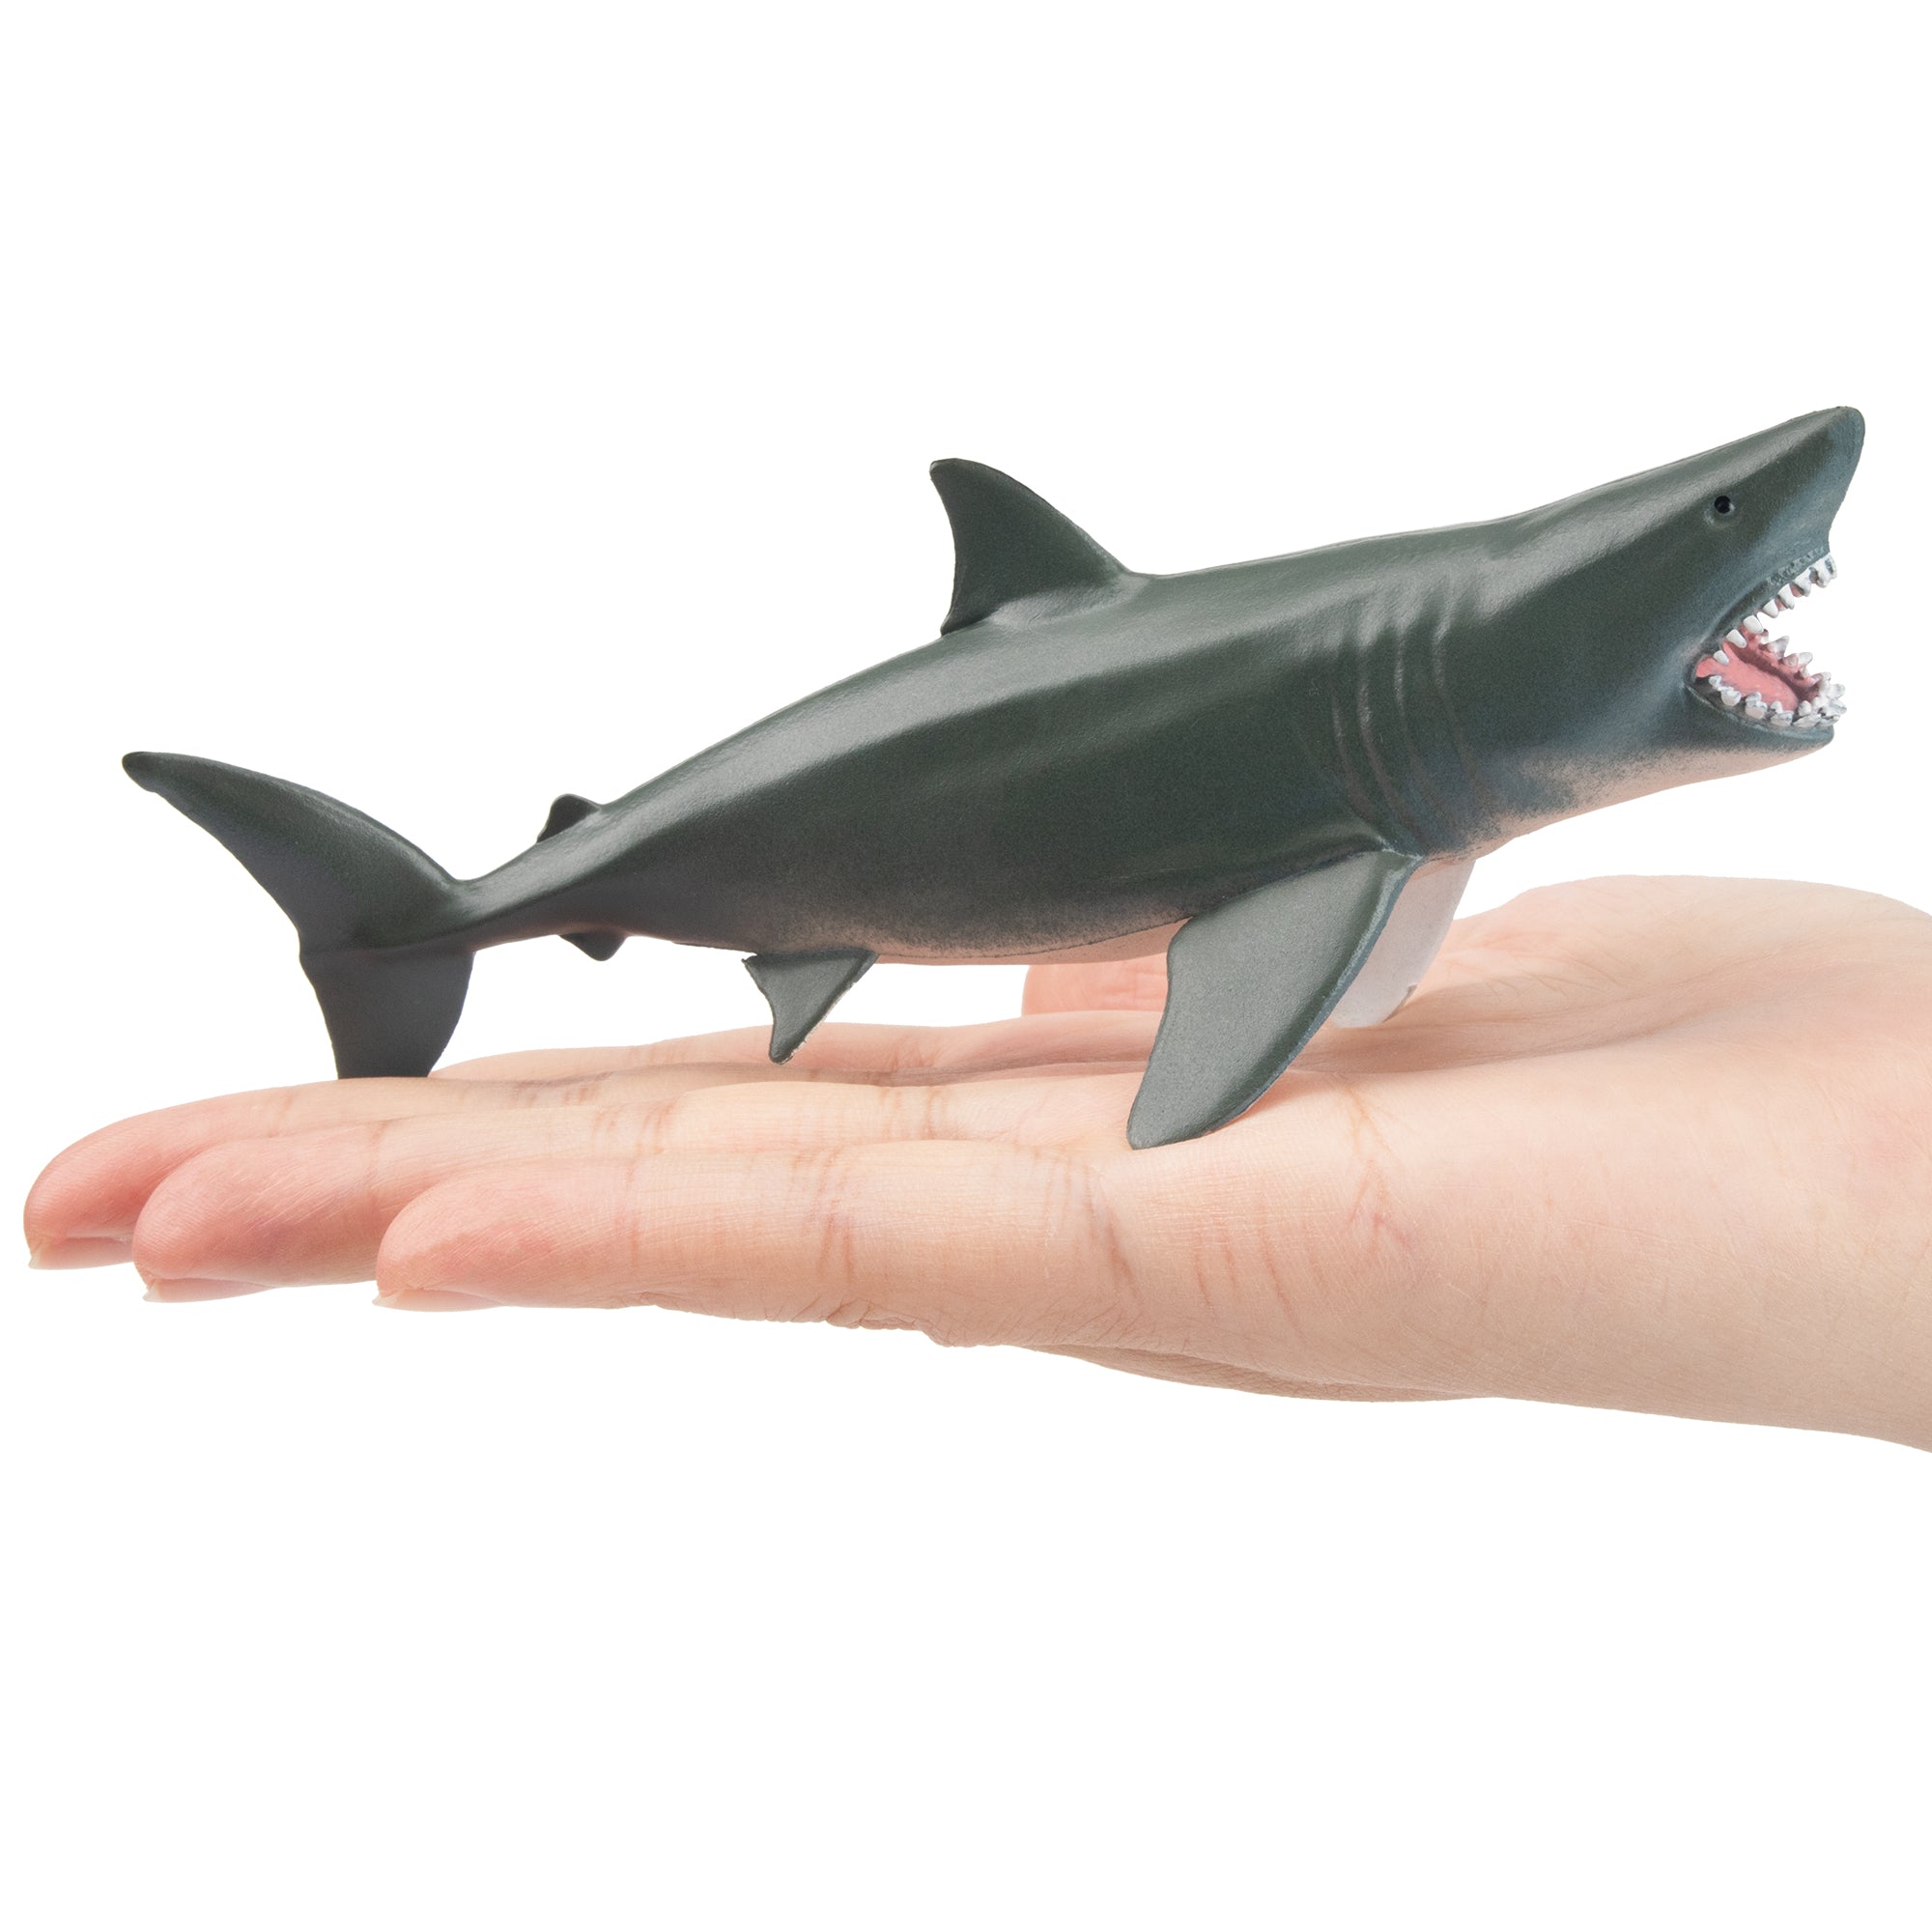 Toymany Open-Mouthed Great White Shark Figurine Toy-on hand